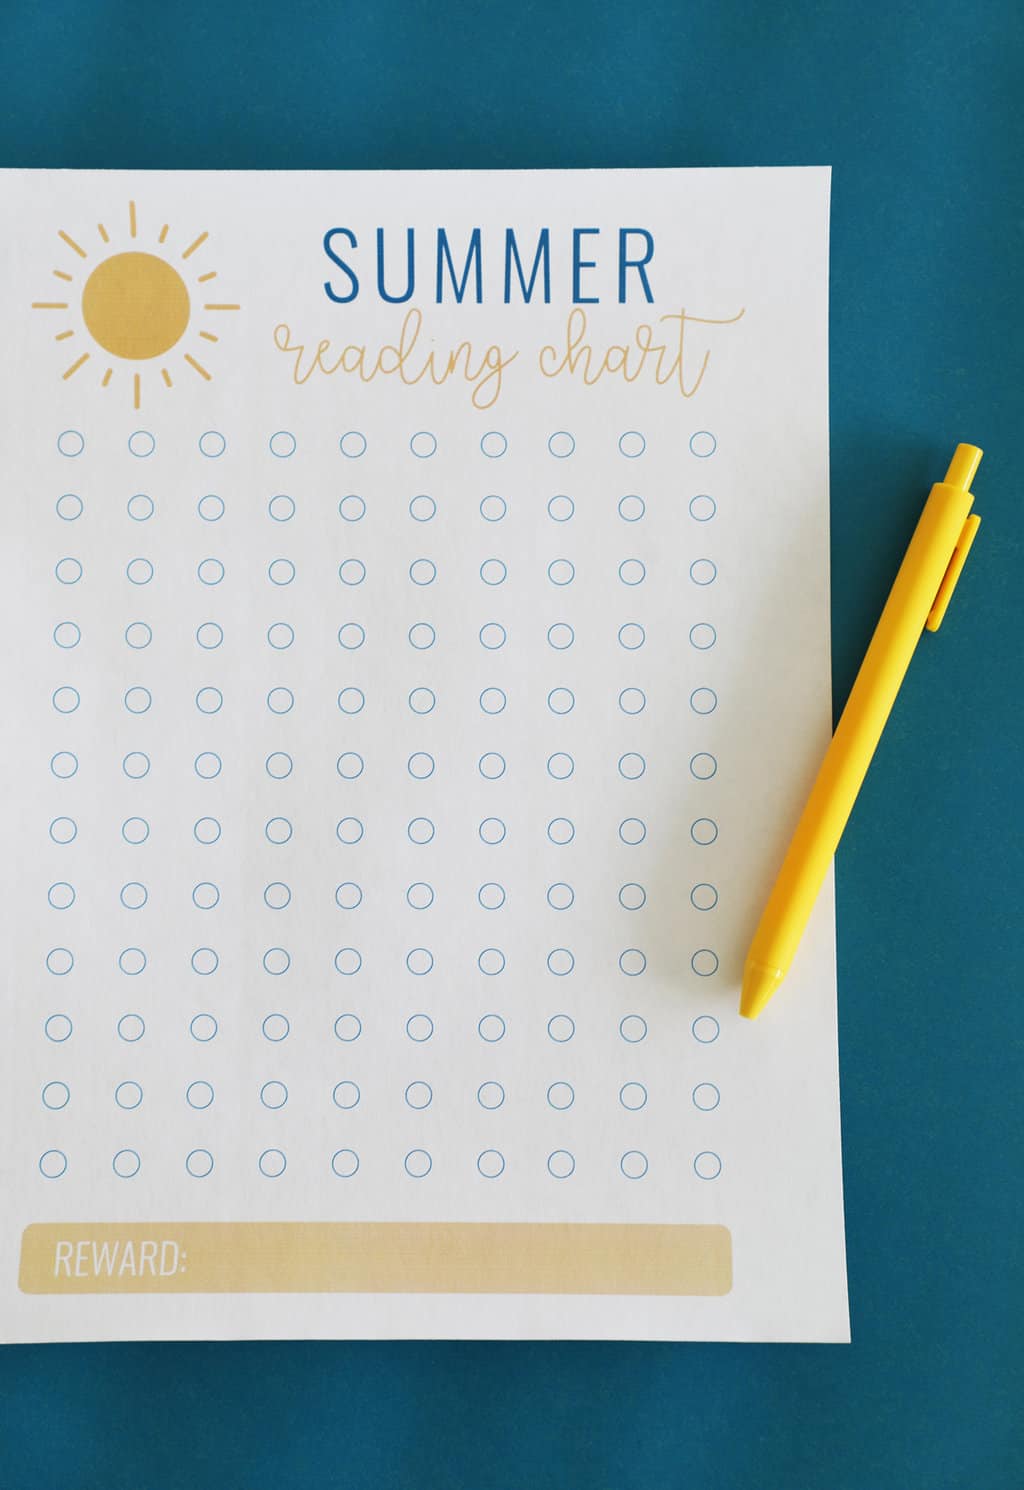 A free printable summer reading chart for kids next to a yellow pen against a blue background.